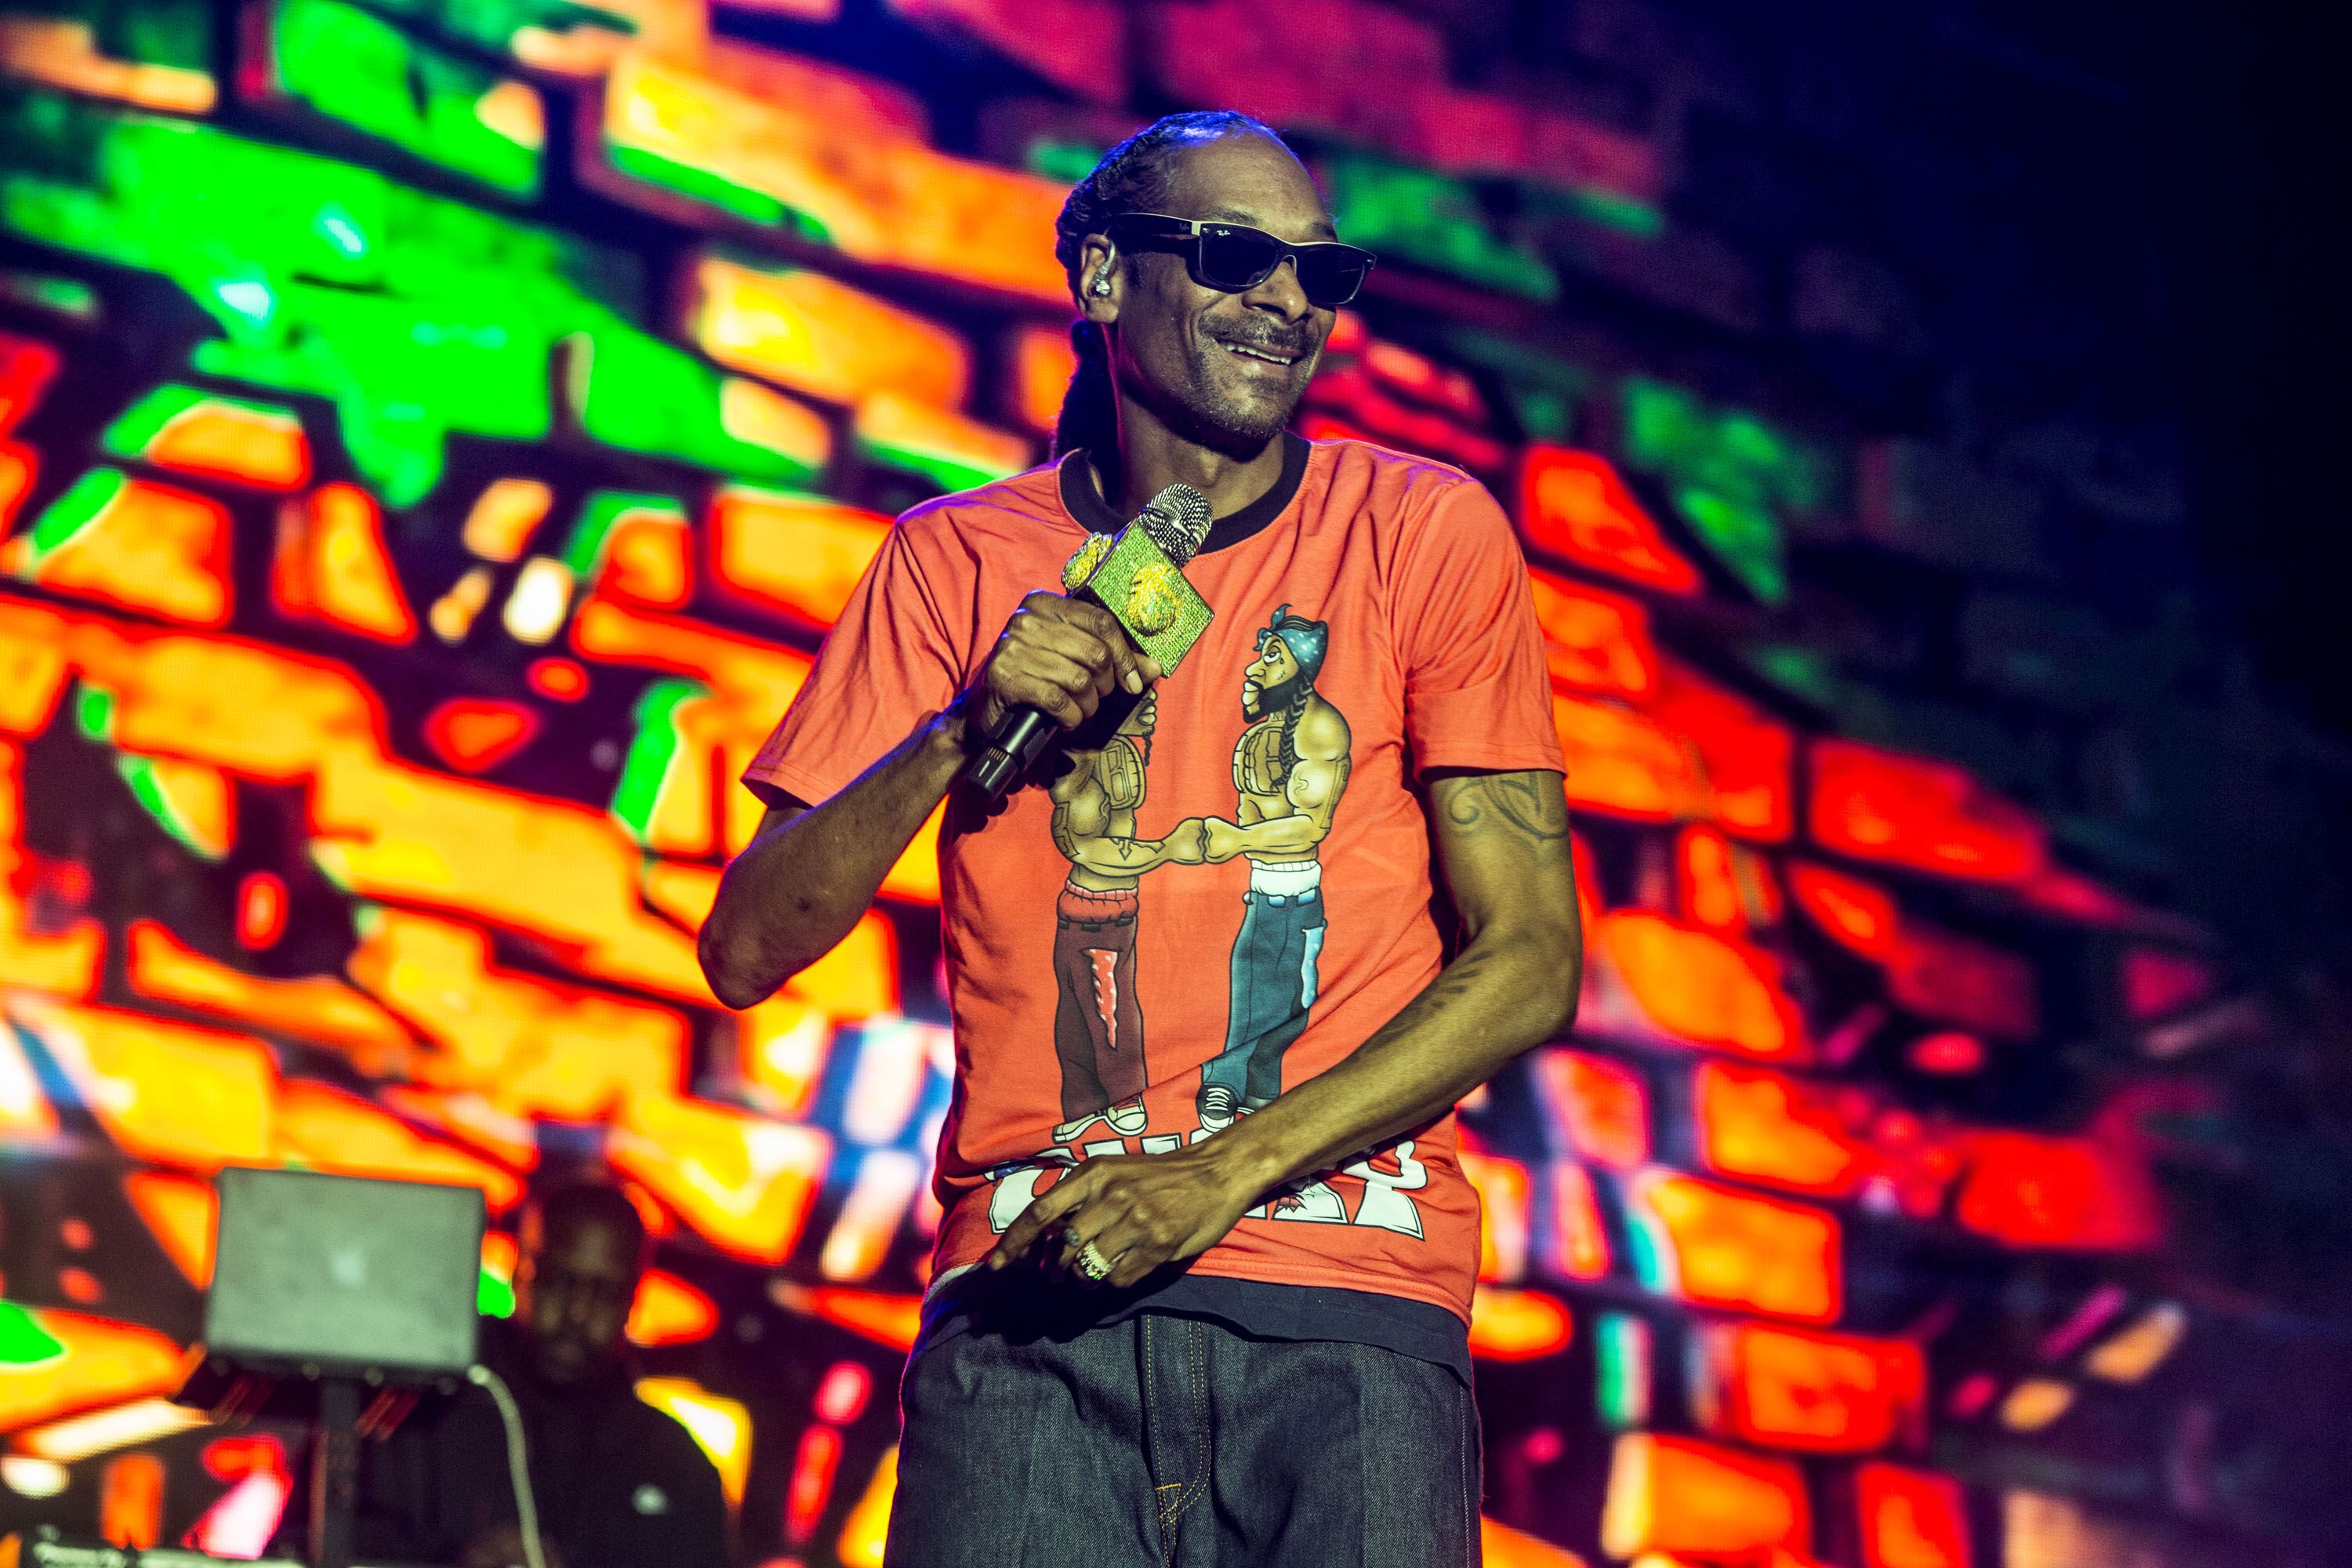 Snoop Dogg performs at 2019 KAABOO Del Mar at Del Mar Race Track on September 13, 2019 in Del Mar, California. | Source: Getty Images